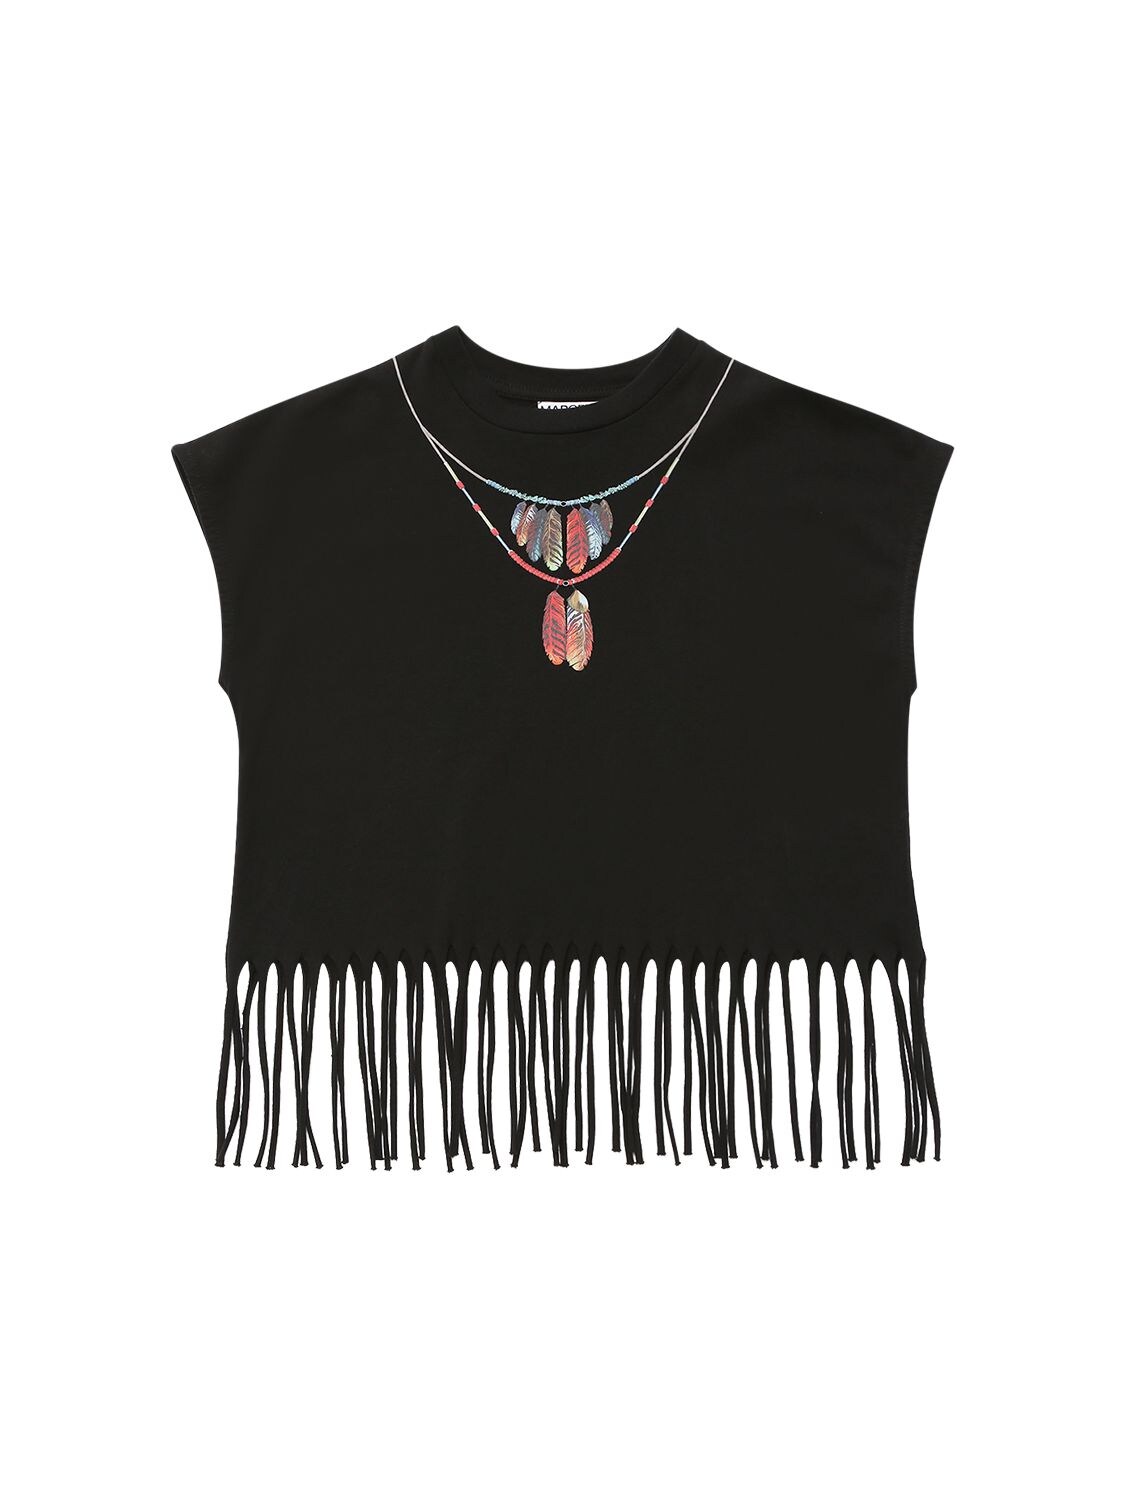 MARCELO BURLON COUNTY OF MILAN FEATHER PRINTED FRINGED COTTON T-SHIRT